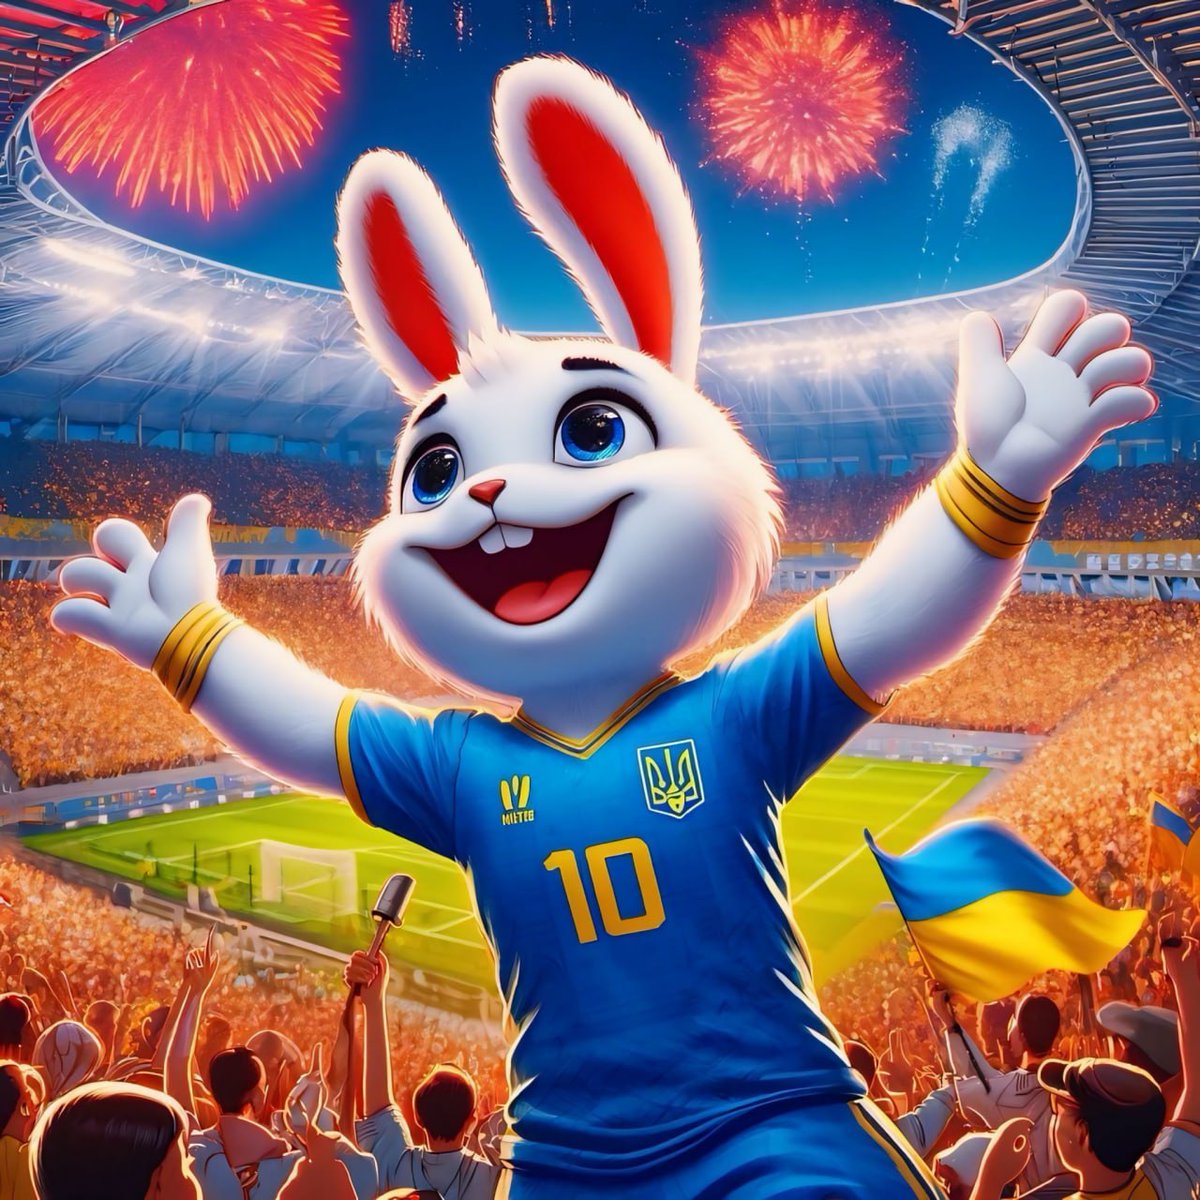 🚨 𝗡𝗘𝗪 𝗟𝗜𝗦𝗧𝗜𝗡𝗚 𝗔𝗟𝗘𝗥𝗧!!

$Bunny will be listed at @Pancakeswap on the BSC network 

Grab your bags and ready!! 💰💰💰

Official Contract: 0x2afc0a4850d22fd61d8c52e355769d941bf43f86

Tax : 5% for buyback 

Buy more $Bunny! 📈

#NewListing #Bunny #TradingLive…